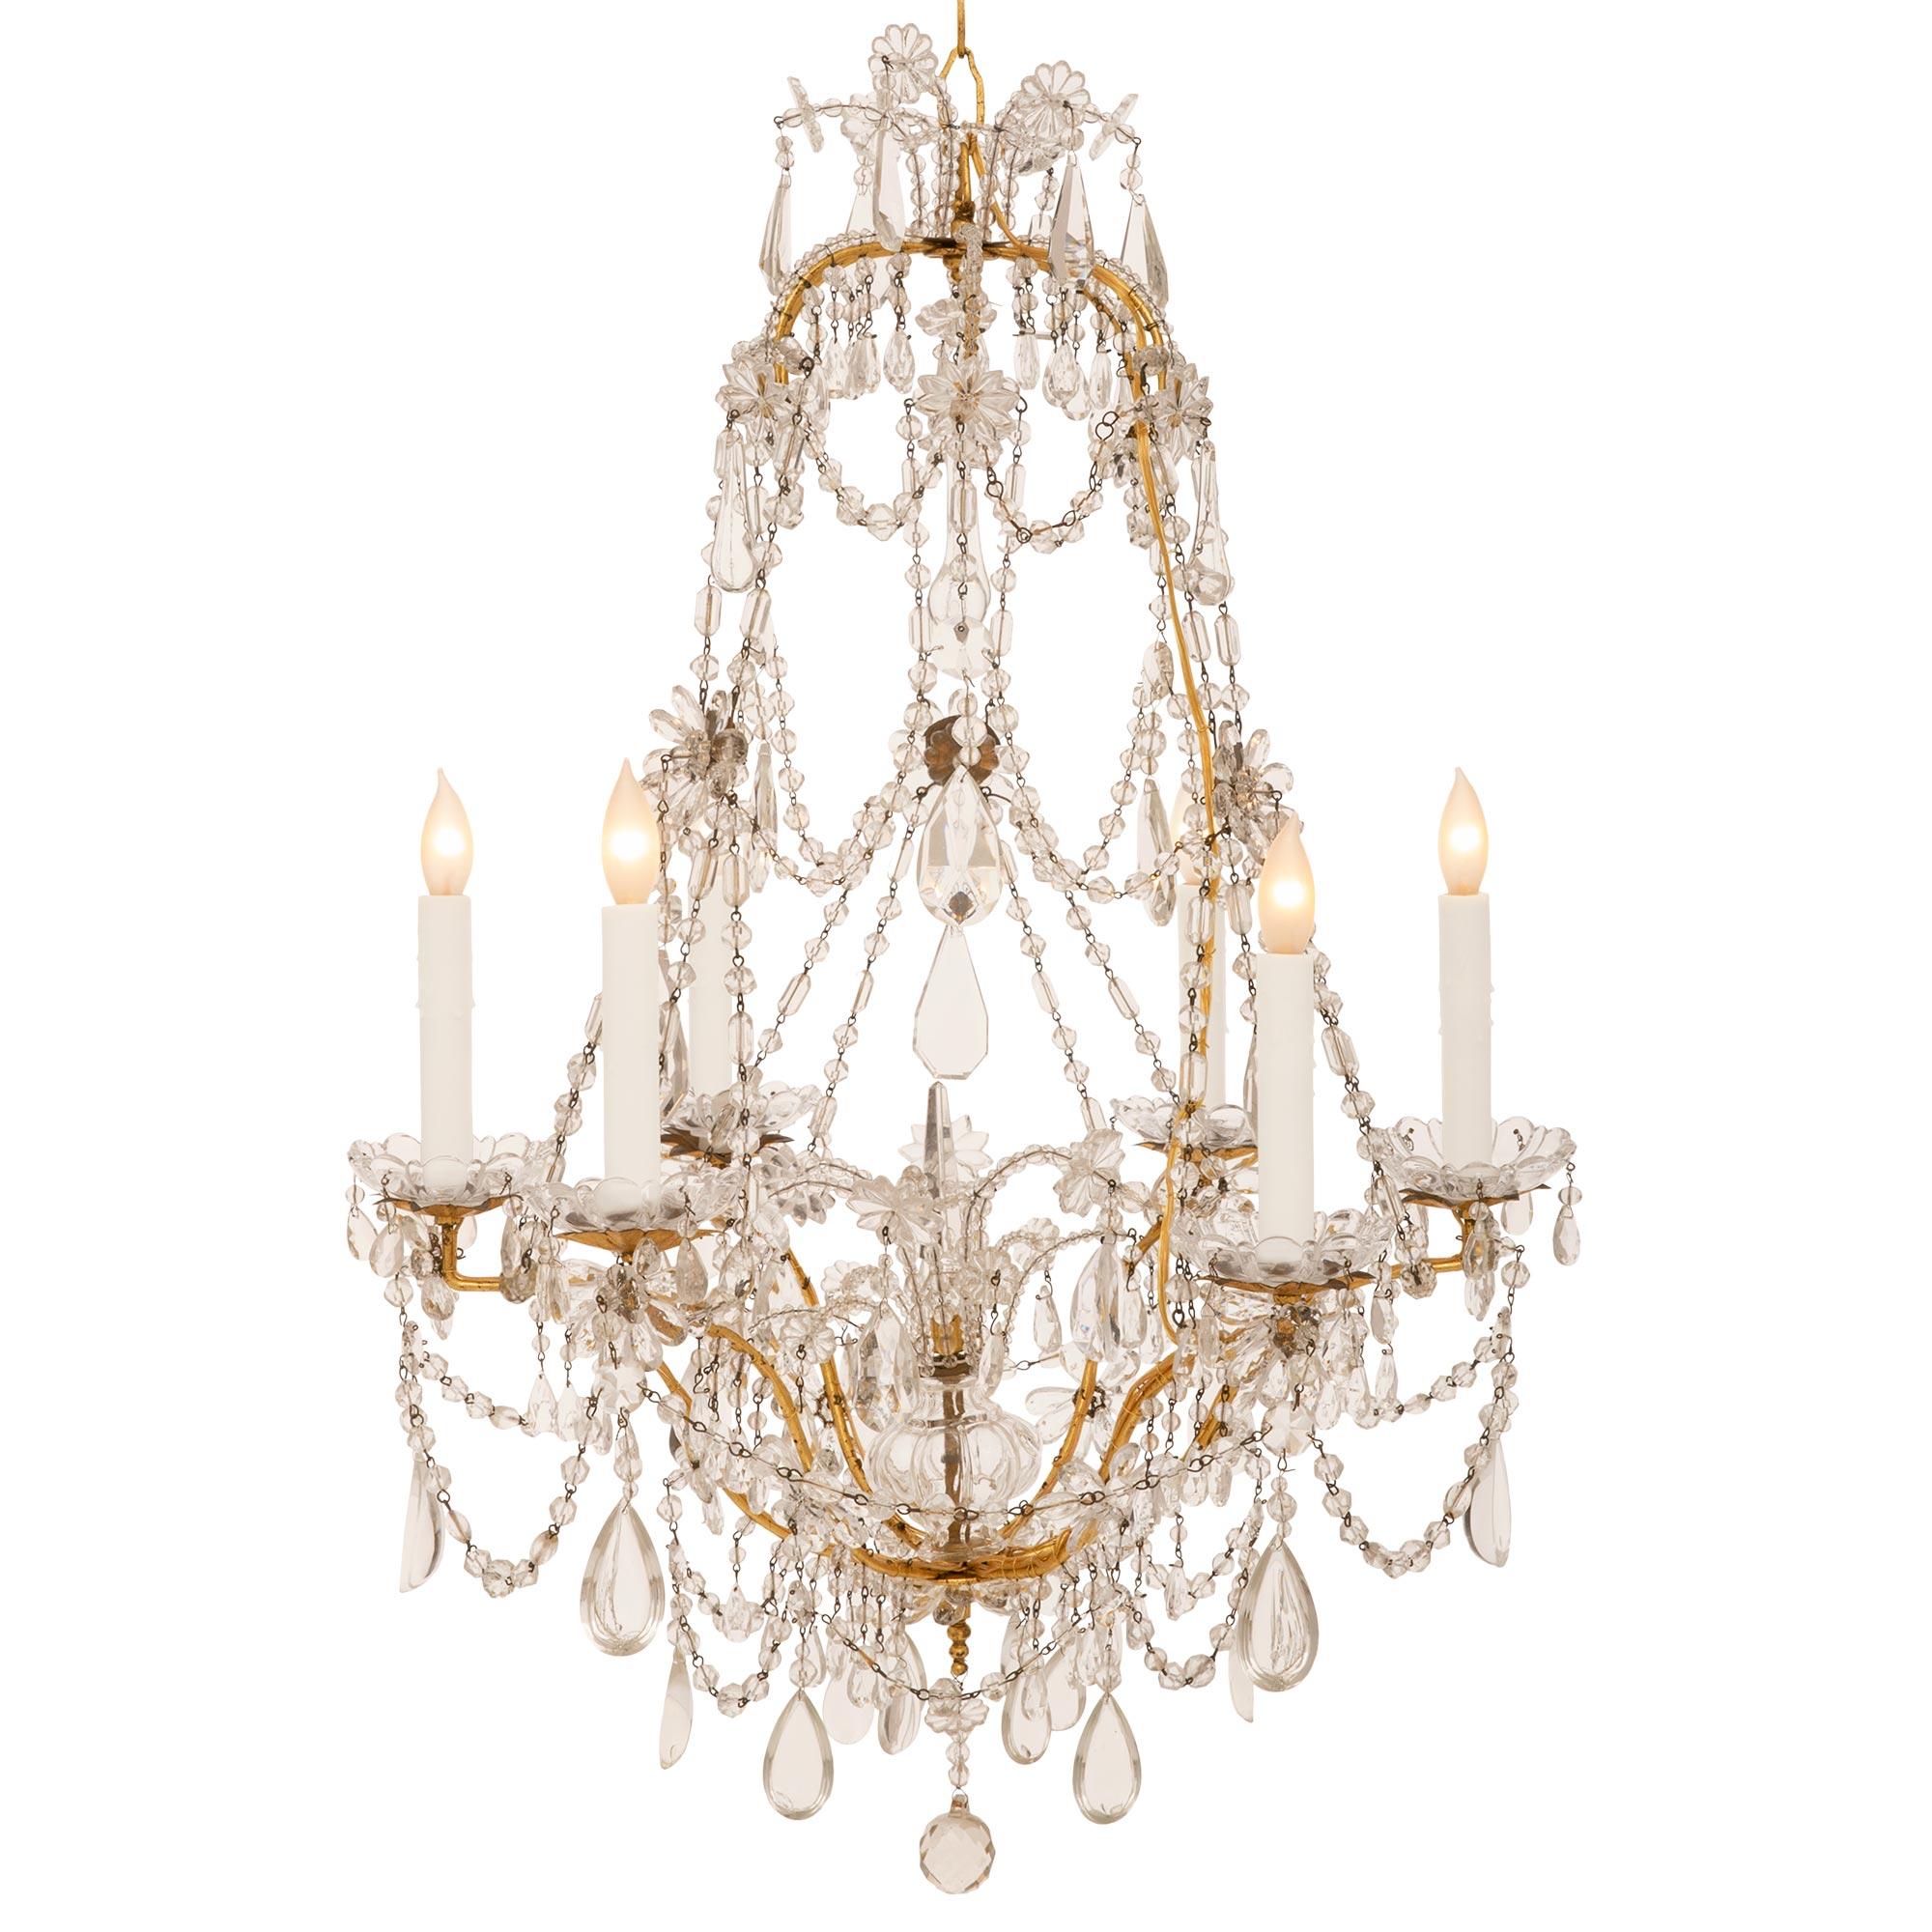 Italian 19th Century Louis XVI St. Gilt Metal And Crystal Chandelier In Good Condition For Sale In West Palm Beach, FL